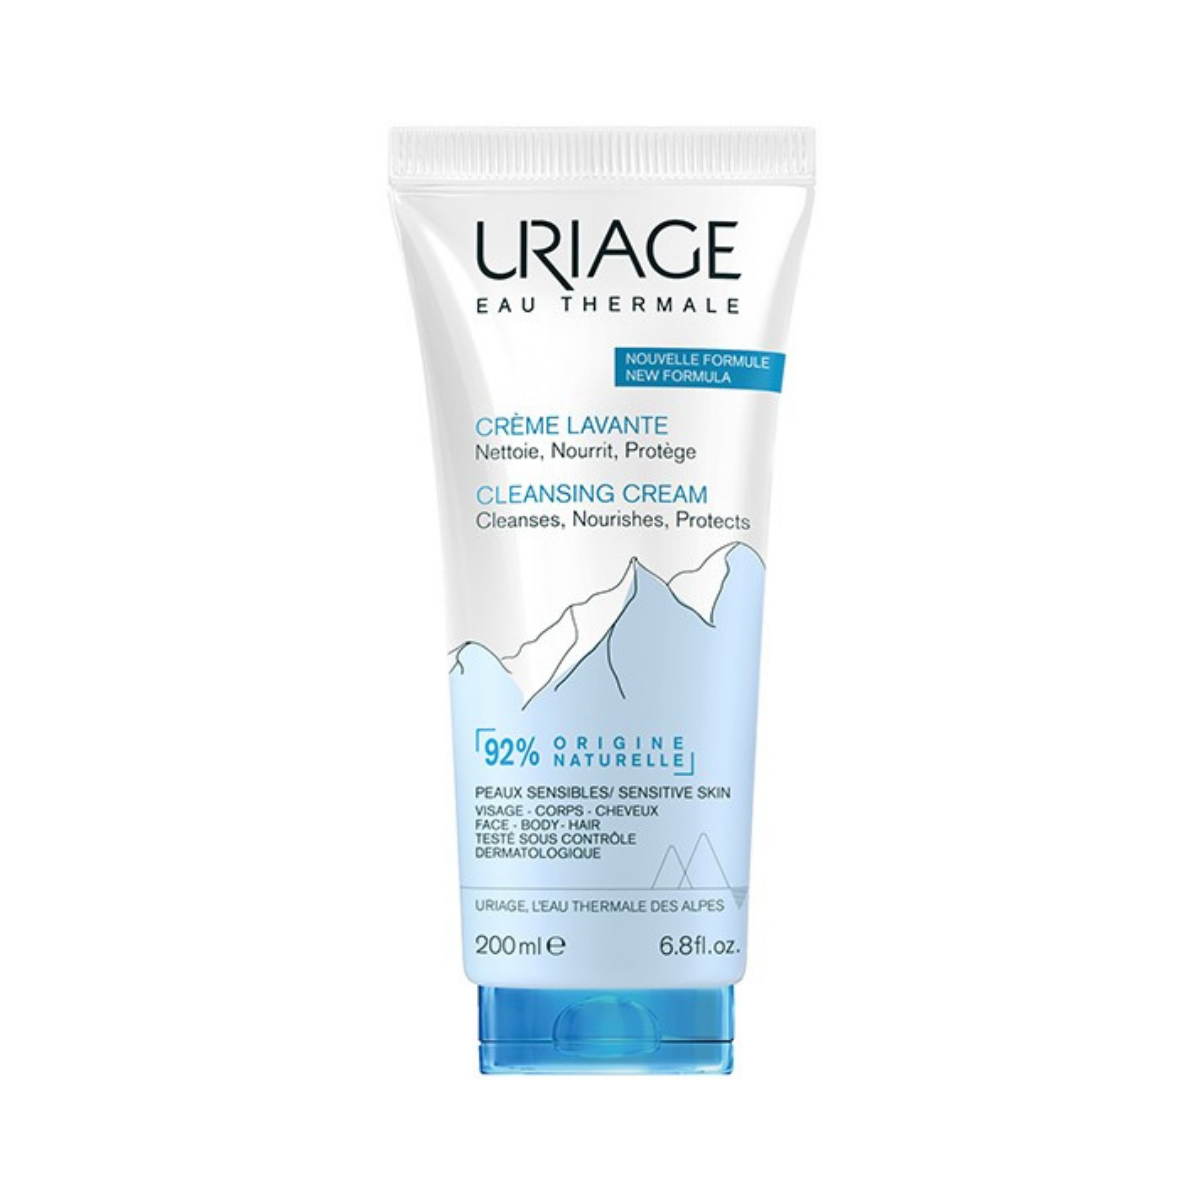 URIAGE BABY 1st No-Rinse Cleansing Water 1L + 1st Cleansing Cream 200ml